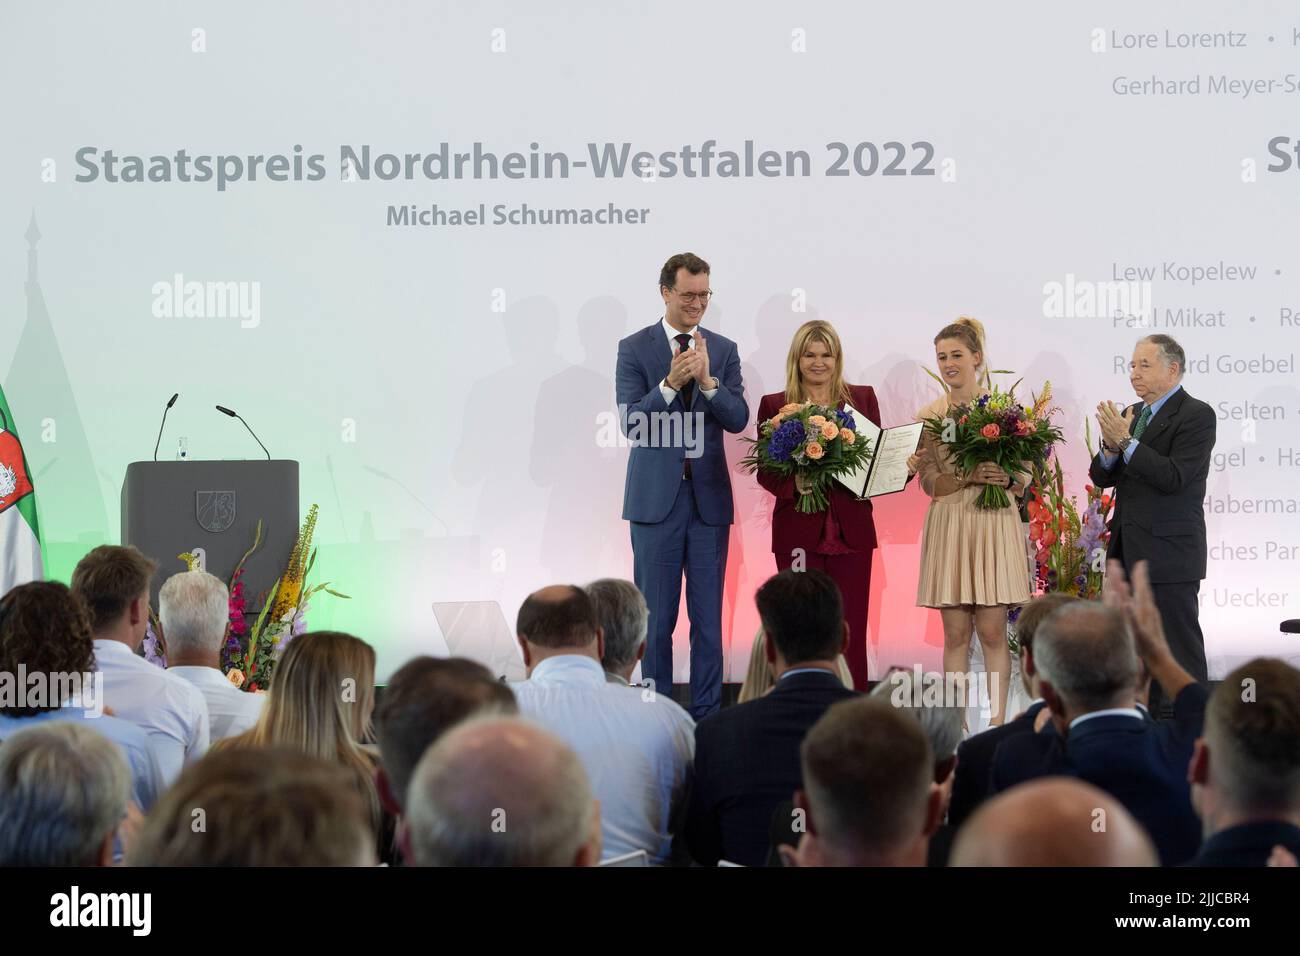 Cologne, Deutschland. 20th July, 2022. from left: Hendrik WUEST, W?st, CDU, Prime Minister of North Rhine-Westphalia, Corinna SCHUACHER, Gina SCHUMACHER, with the state award certificate for Michael Schumacher, Jean TODT, former team boss Ferrari, red carpet, Red Carpet Show, arrival, arrival, presentation of the State Prize of the State of North Rhine-Westphalia in Cologne on July 20th, 2022 ? Credit: dpa/Alamy Live News Stock Photo